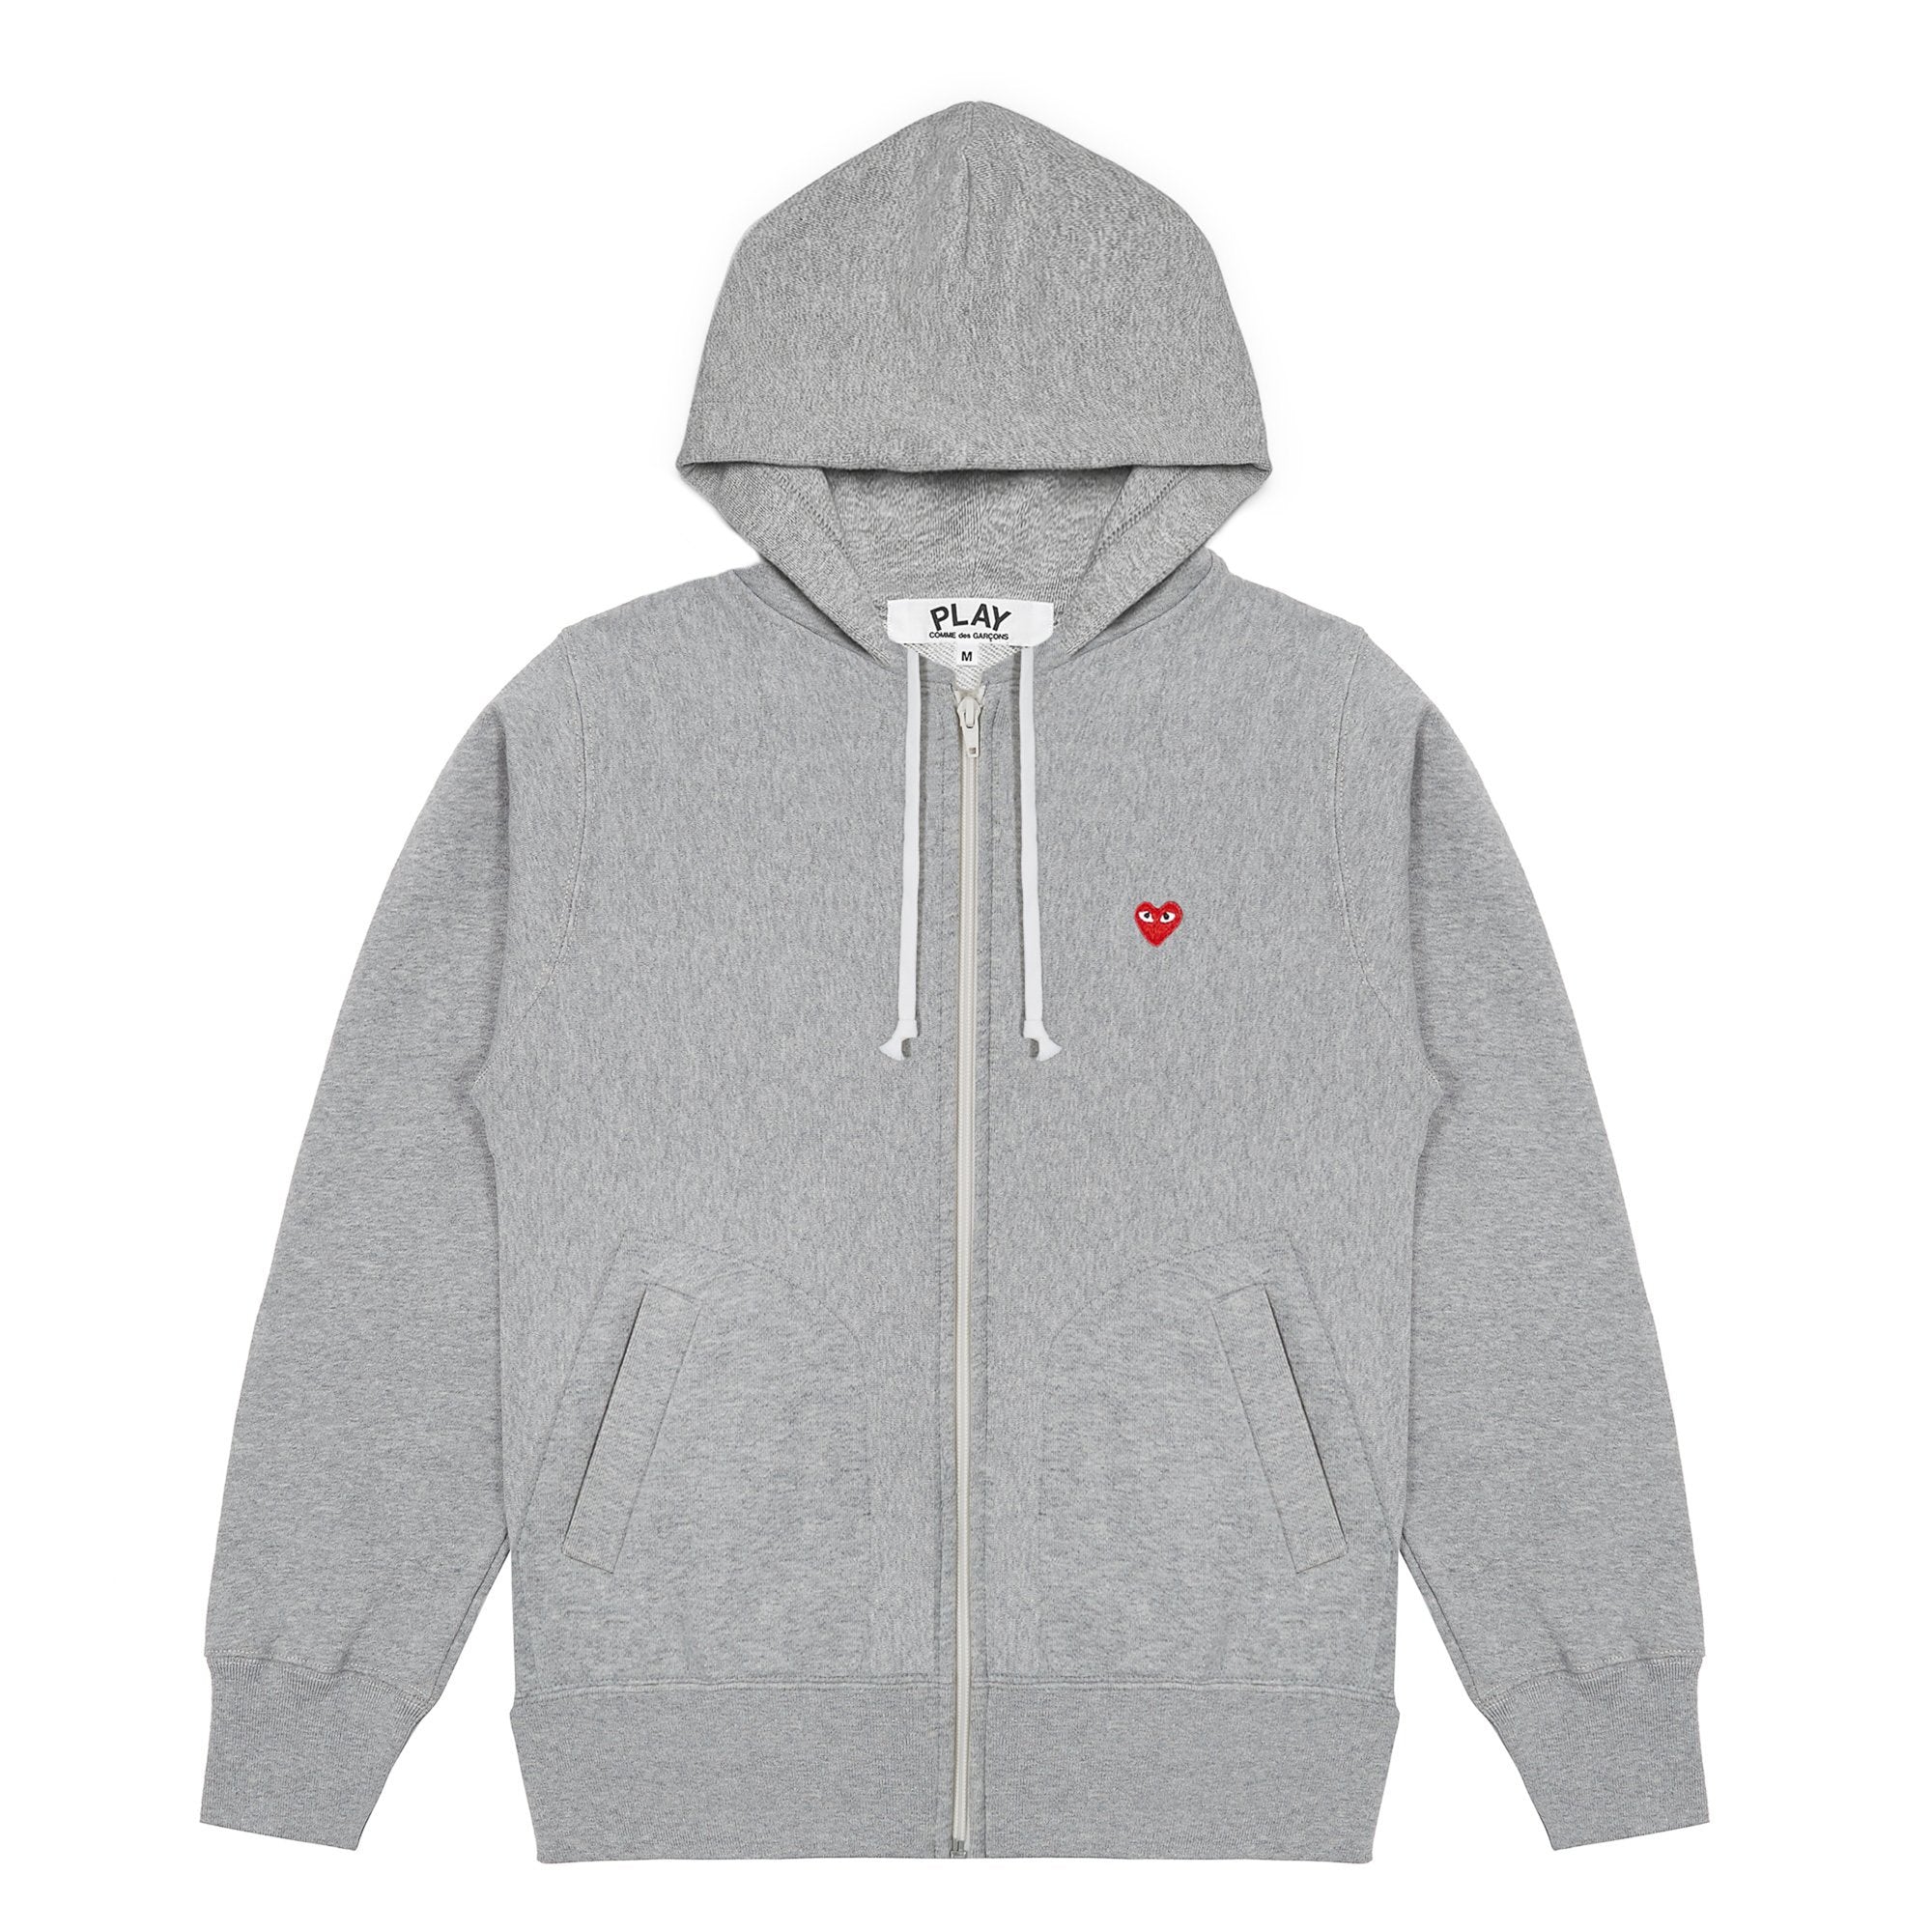 PLAY CDG - HOODED SWEAT SHIRT WITH SMALL RED HEART - (TOP GREY ...